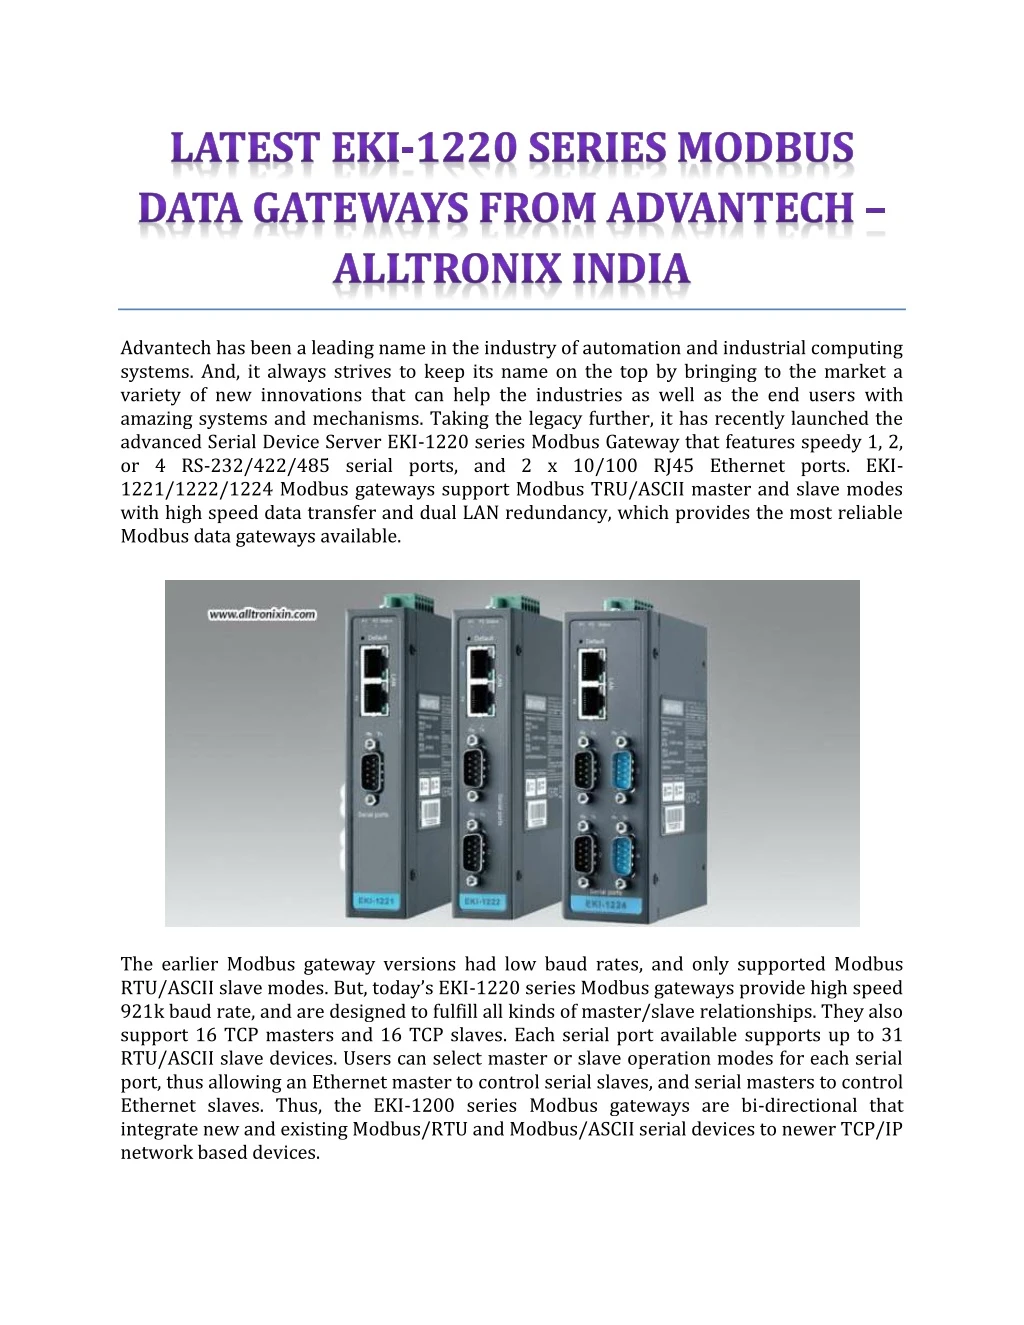 advantech has been a leading name in the industry